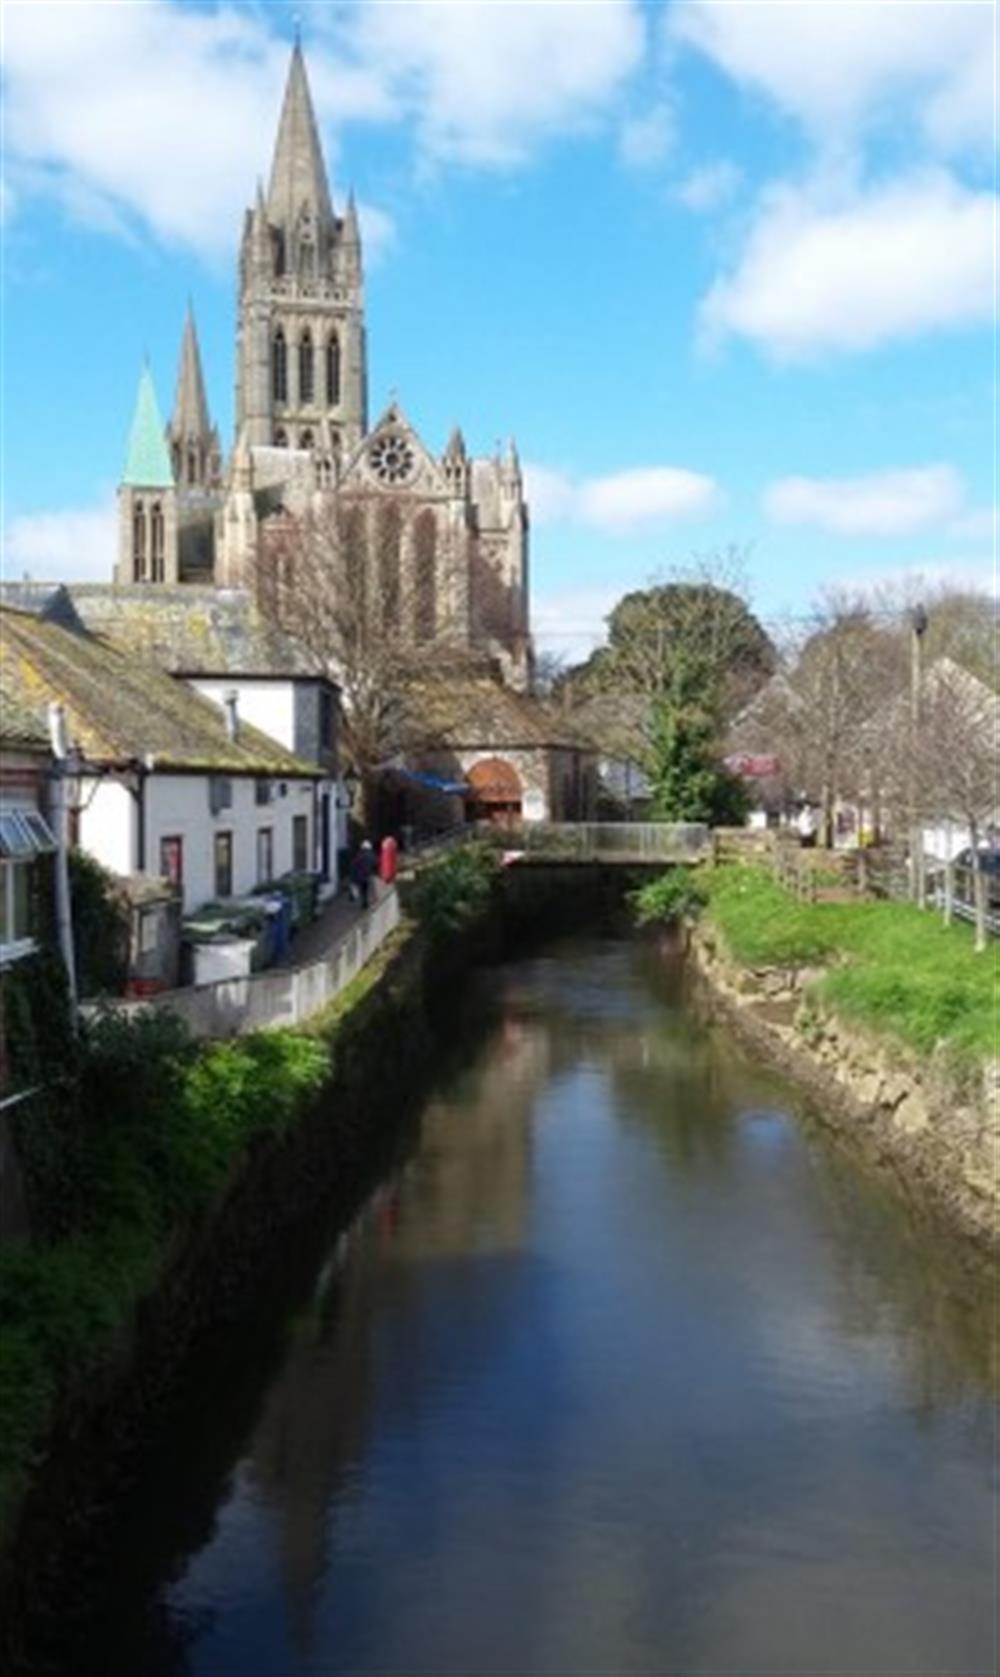 Truro is our main shopping centre. Do take a look